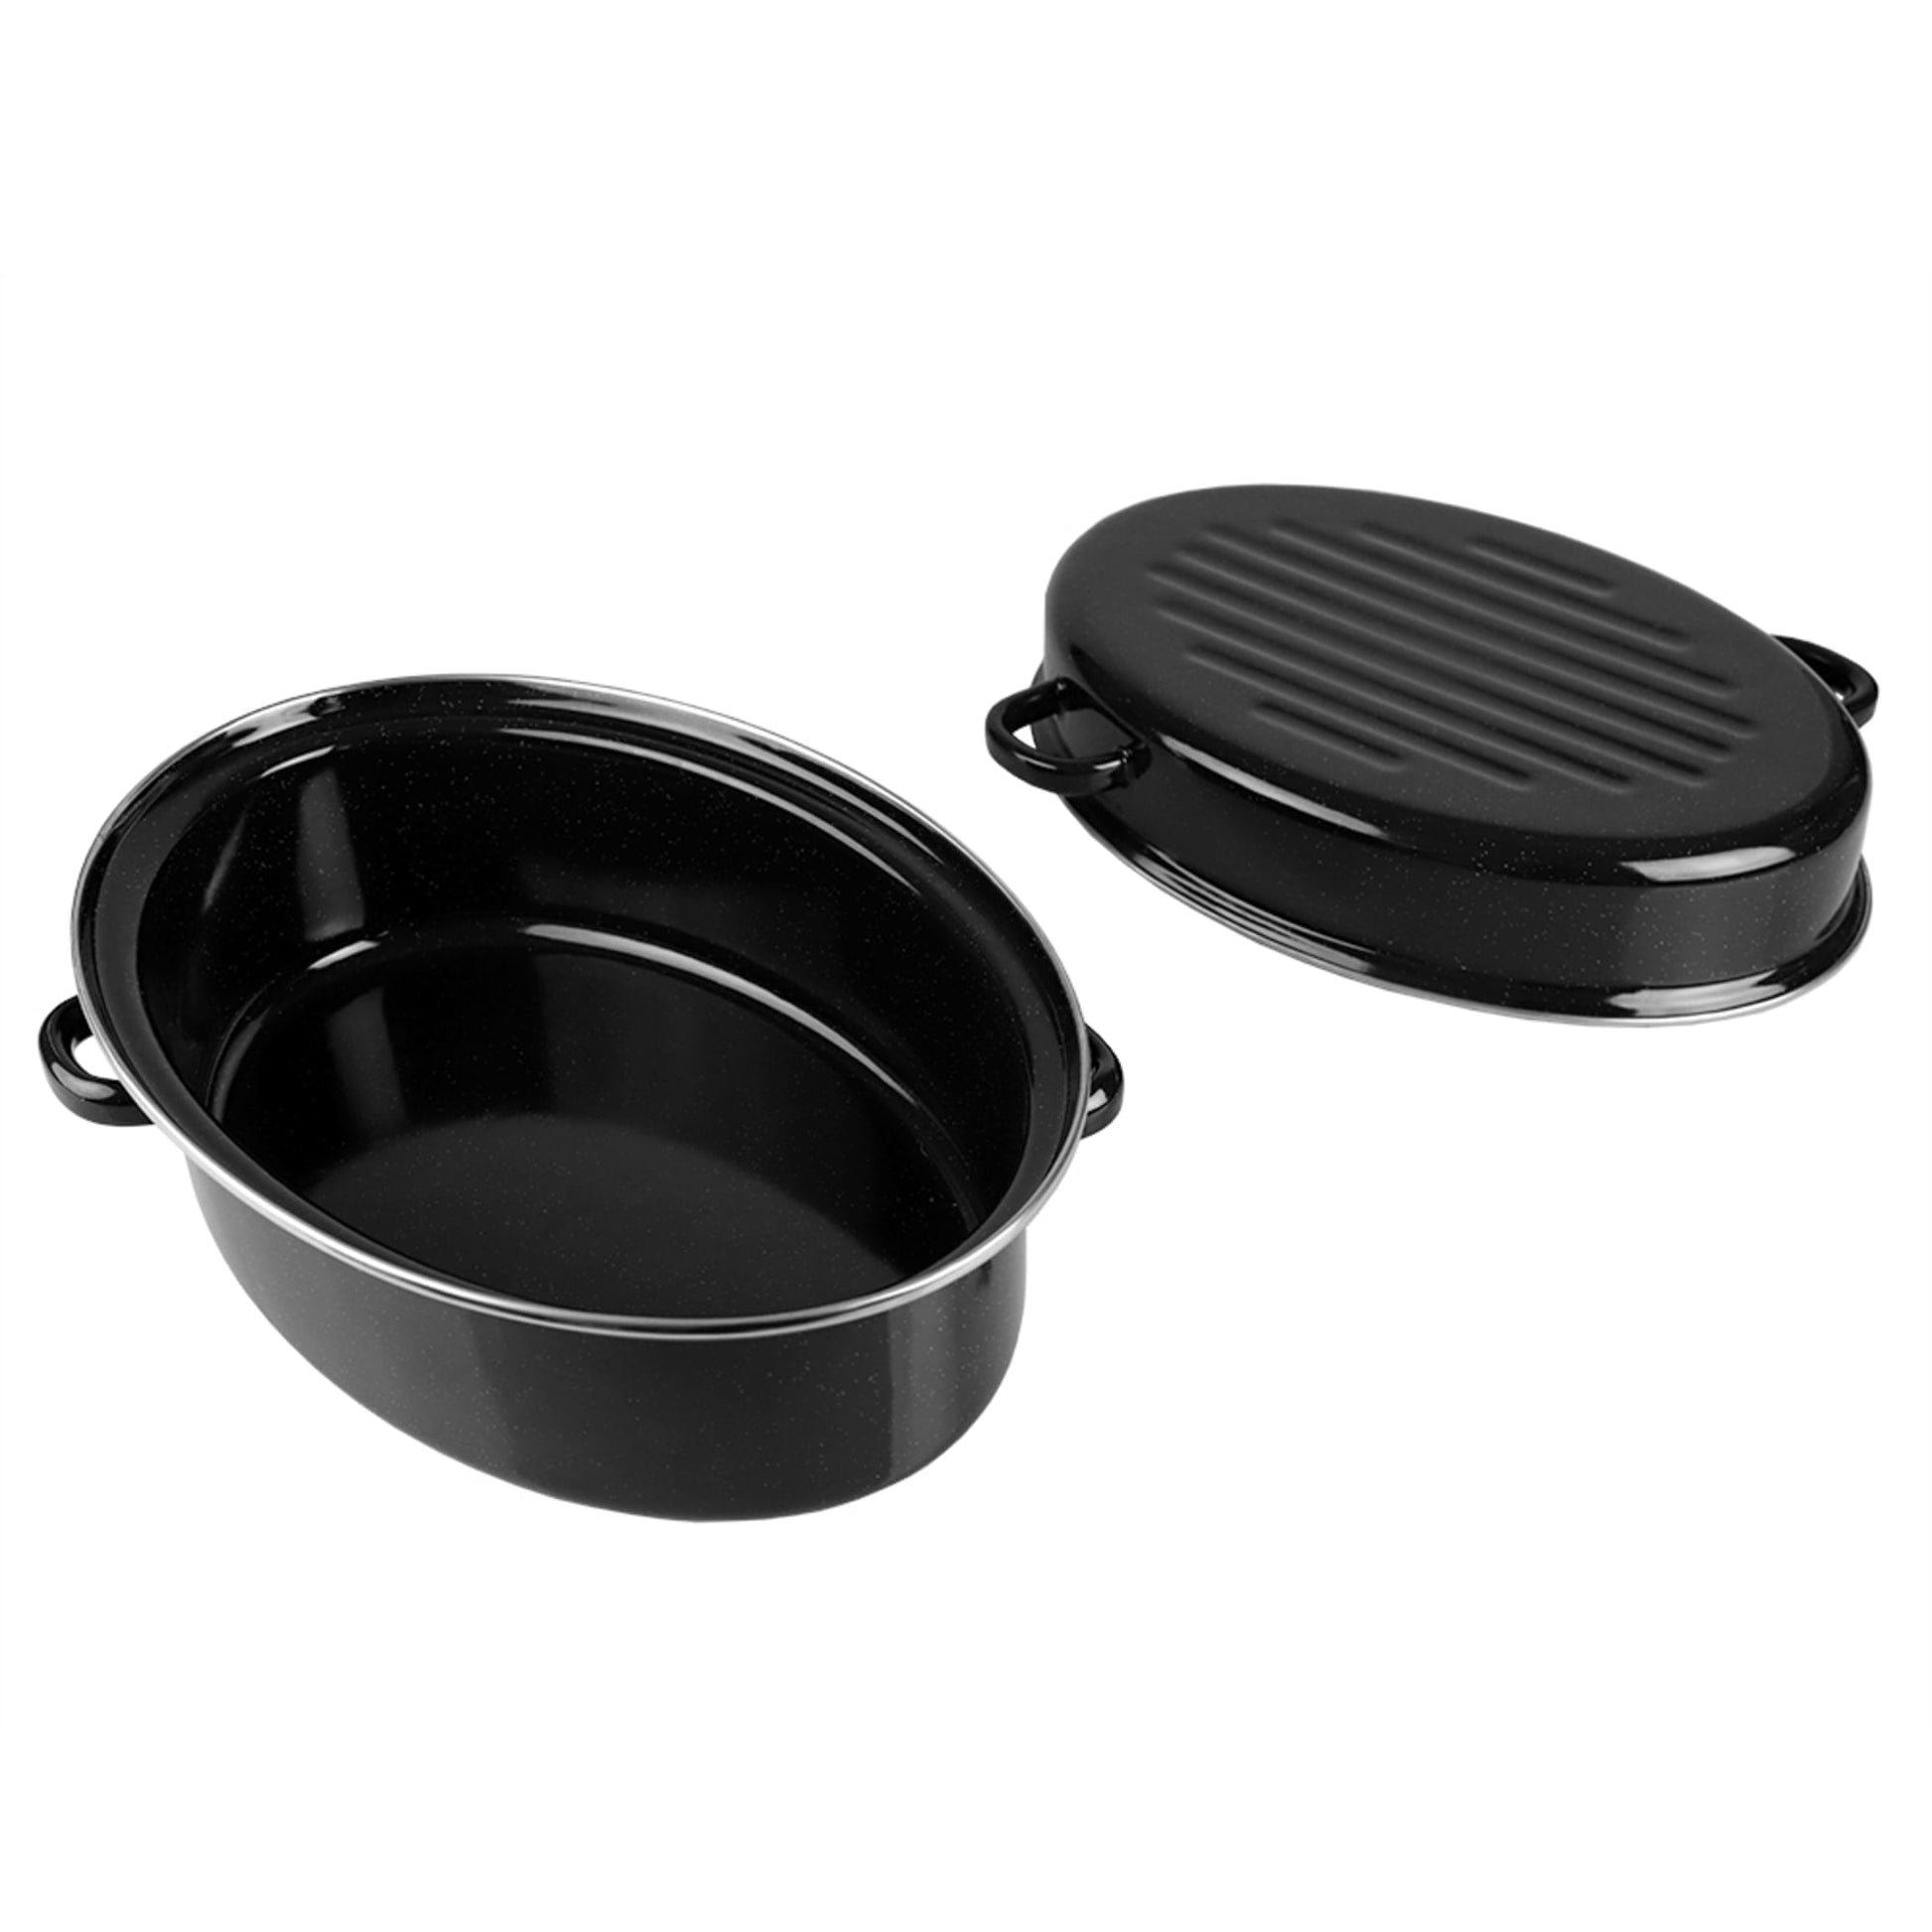  Turkey Roasting Pan With Rack (Grey/Black), By Home Basics, Carbon Steel Non-Stick Pan With Handles